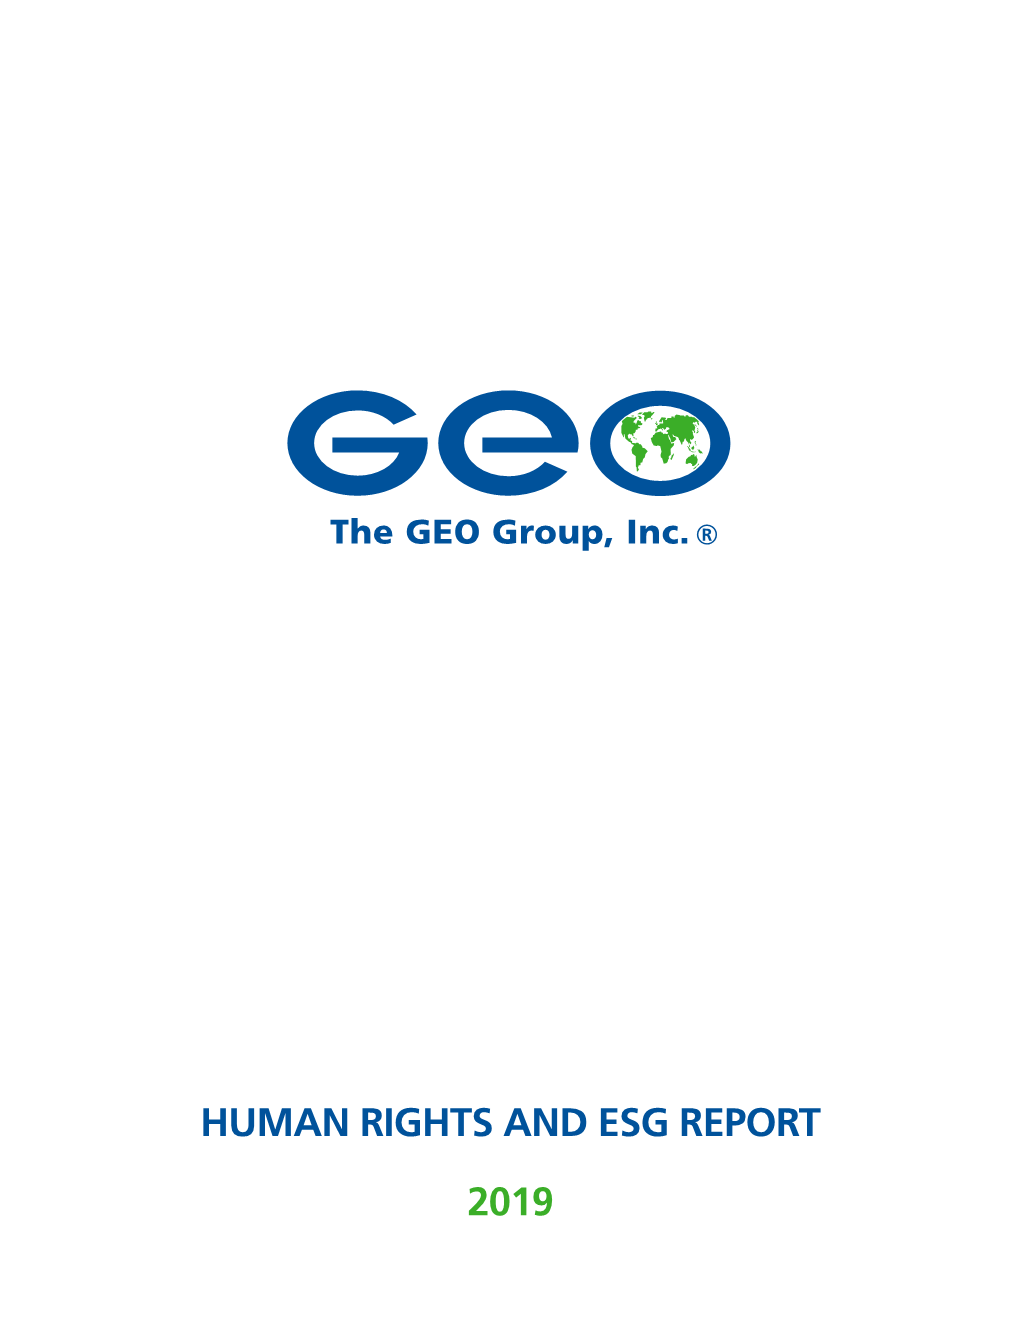 Human Rights and Esg Report 2019